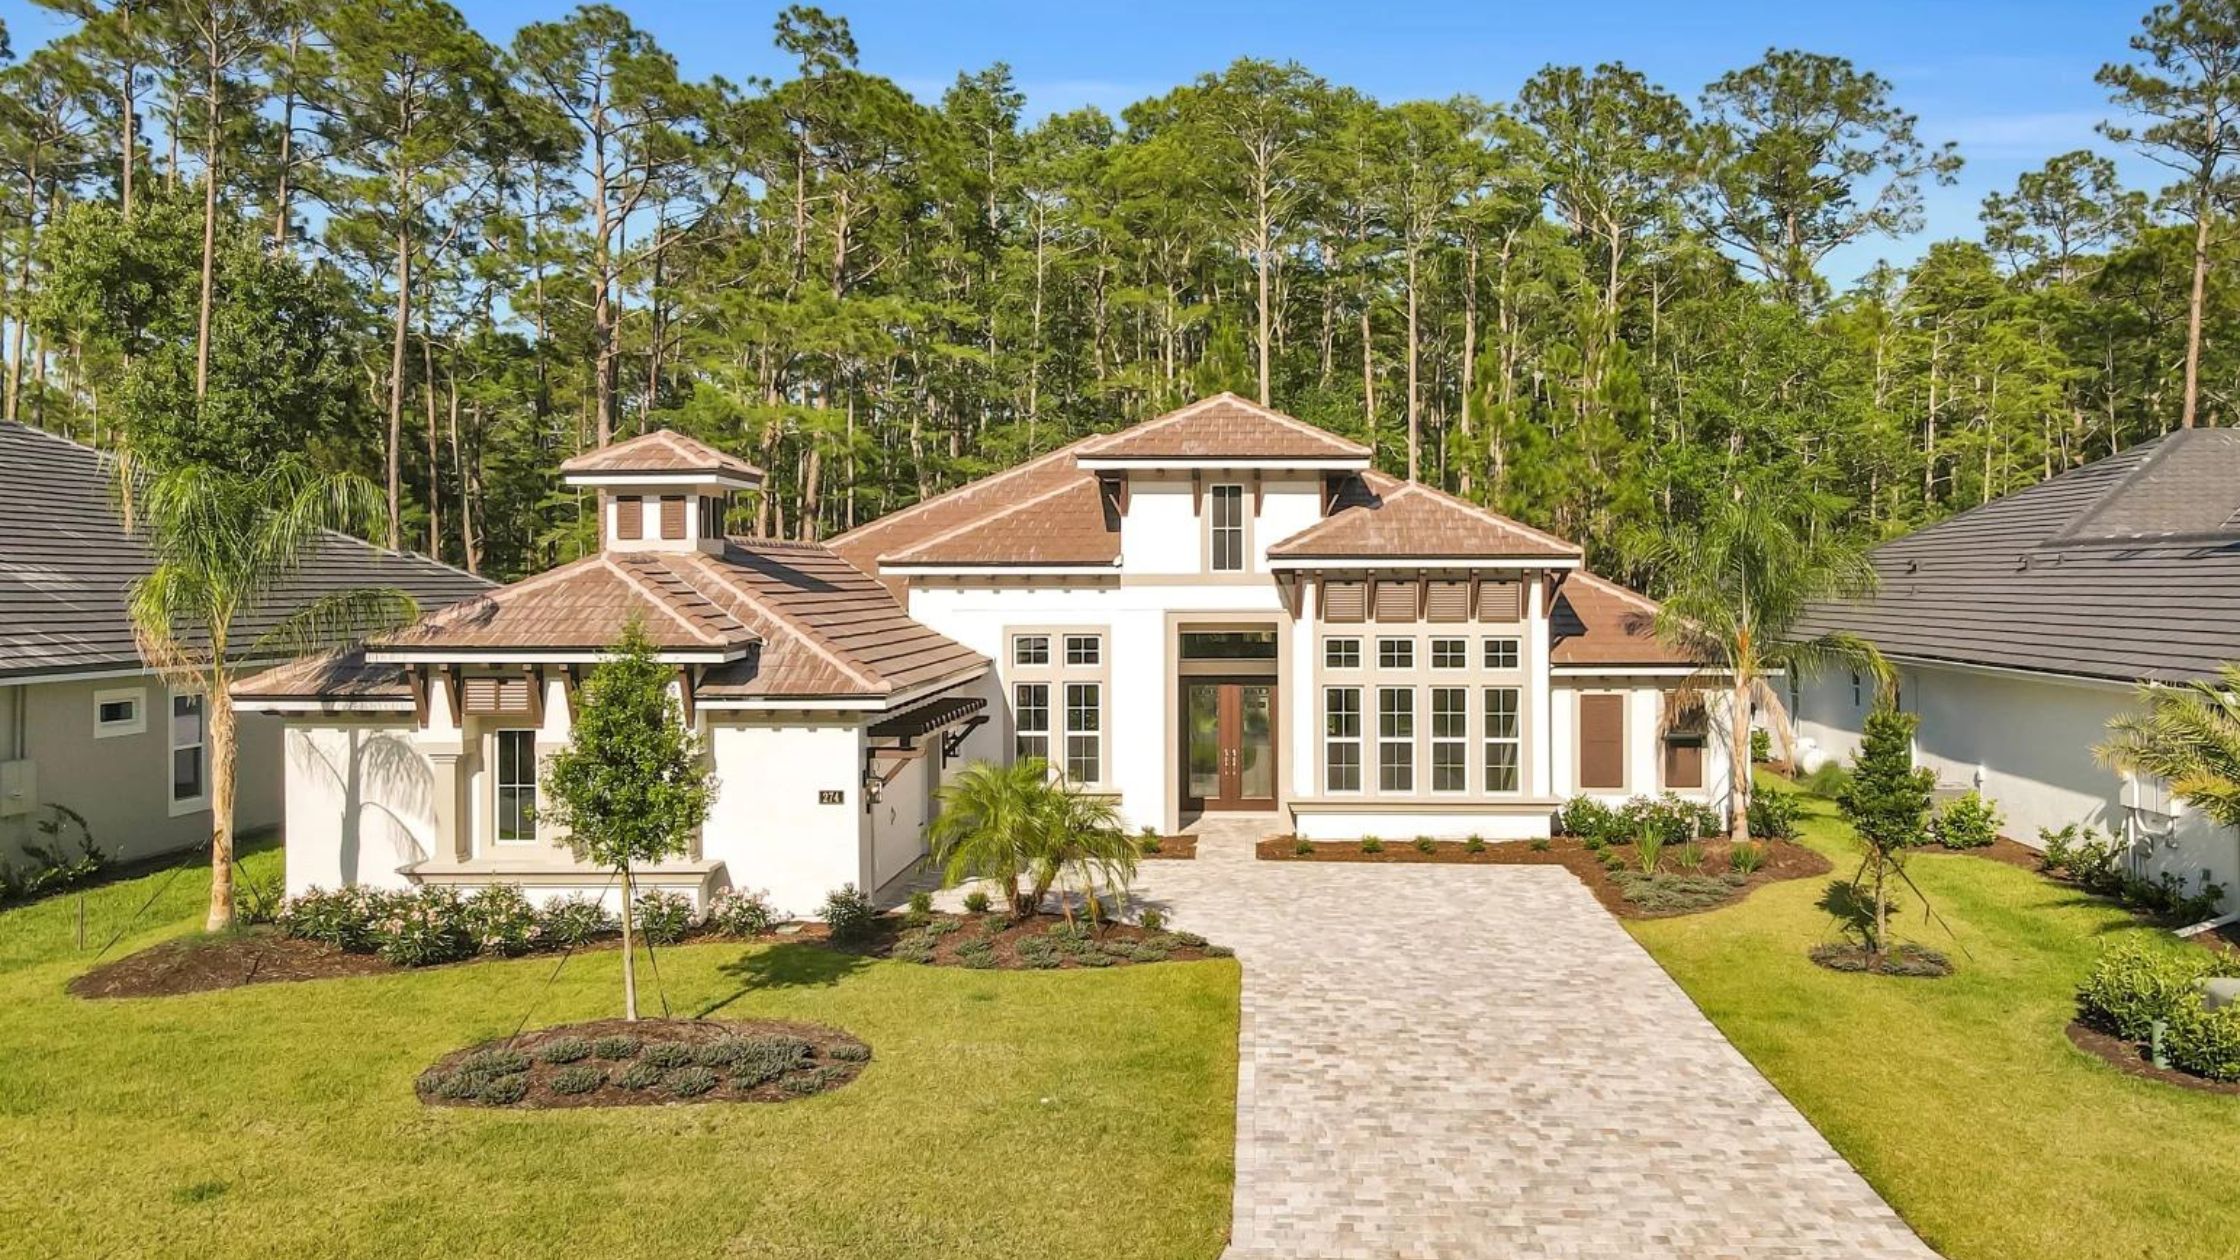 Don’t Miss Plantation Bay’s Move In Ready Homes - Blog 2